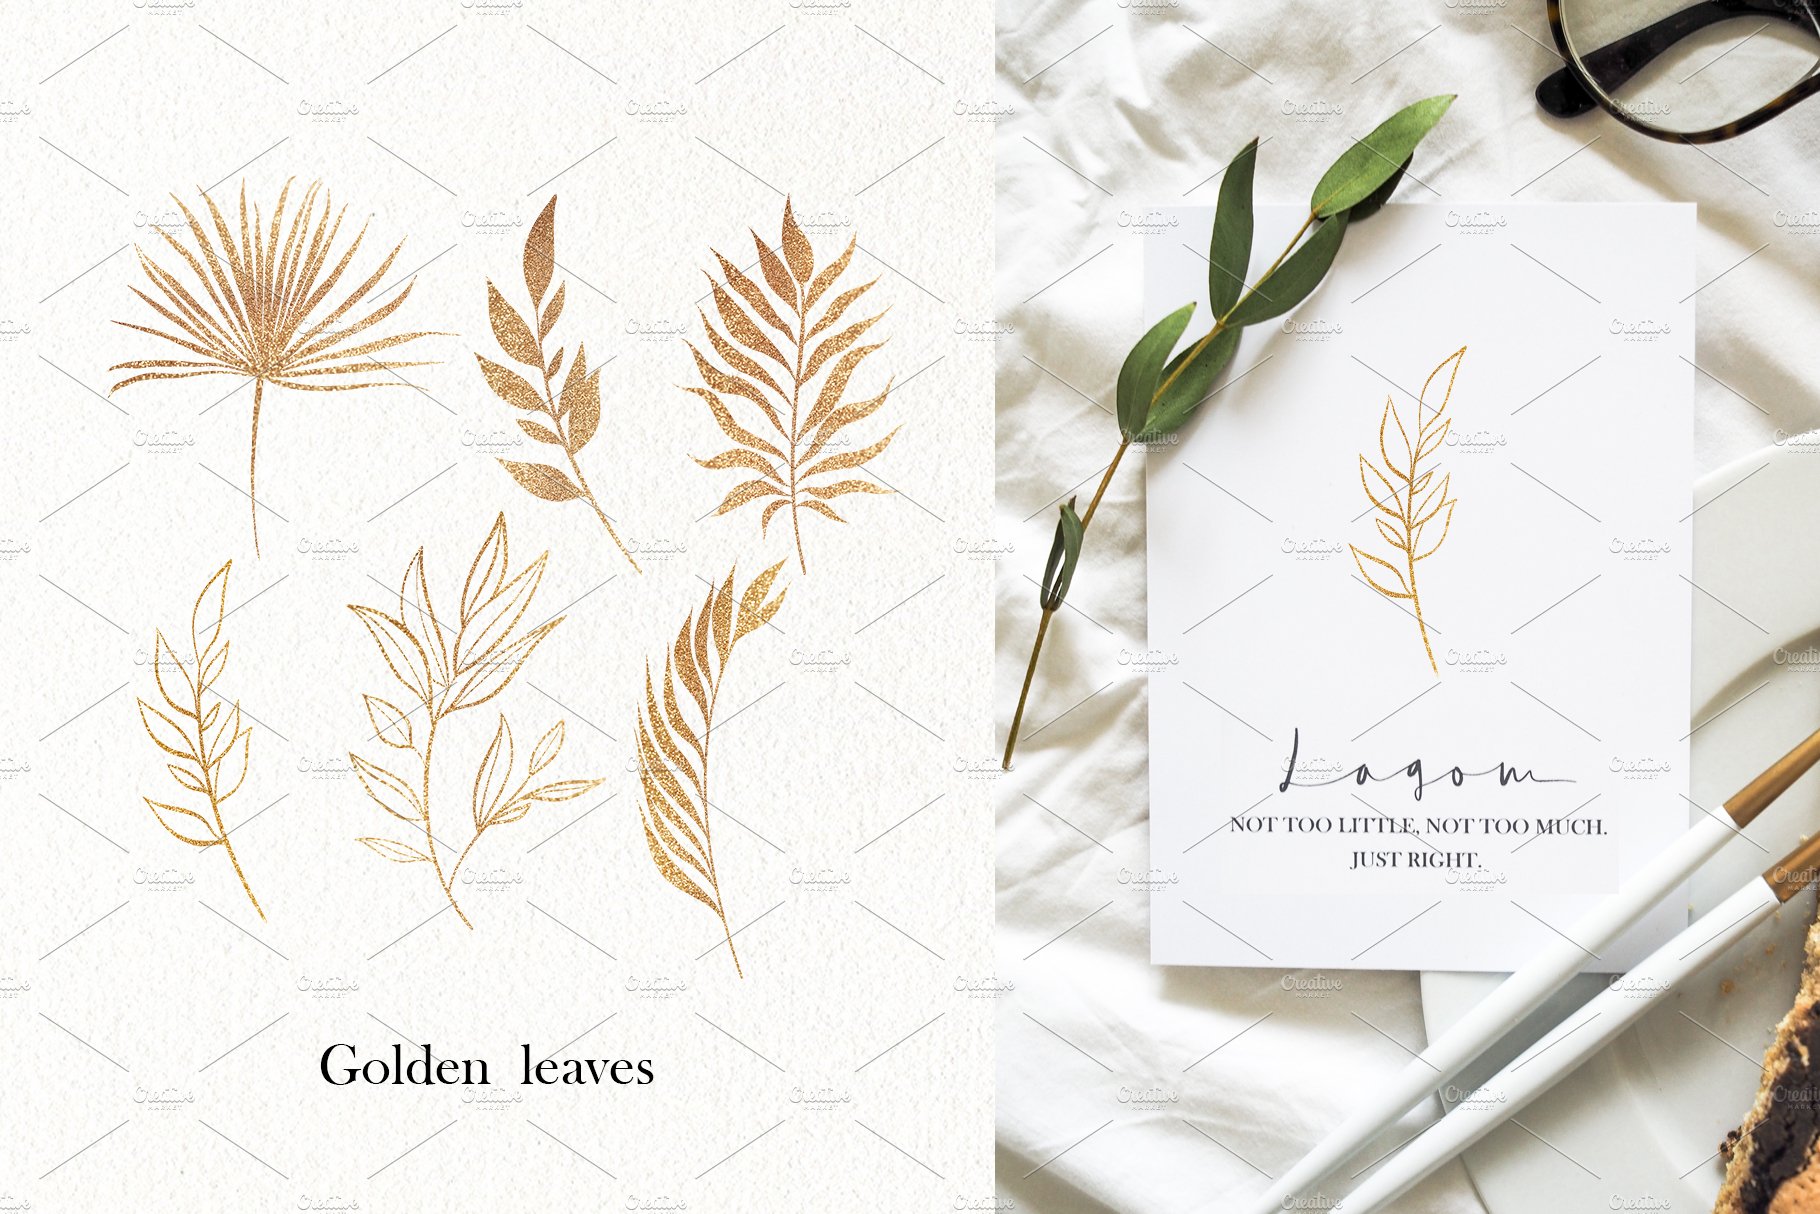 Golden leaves on a white background next to a pair of eyeglasses.